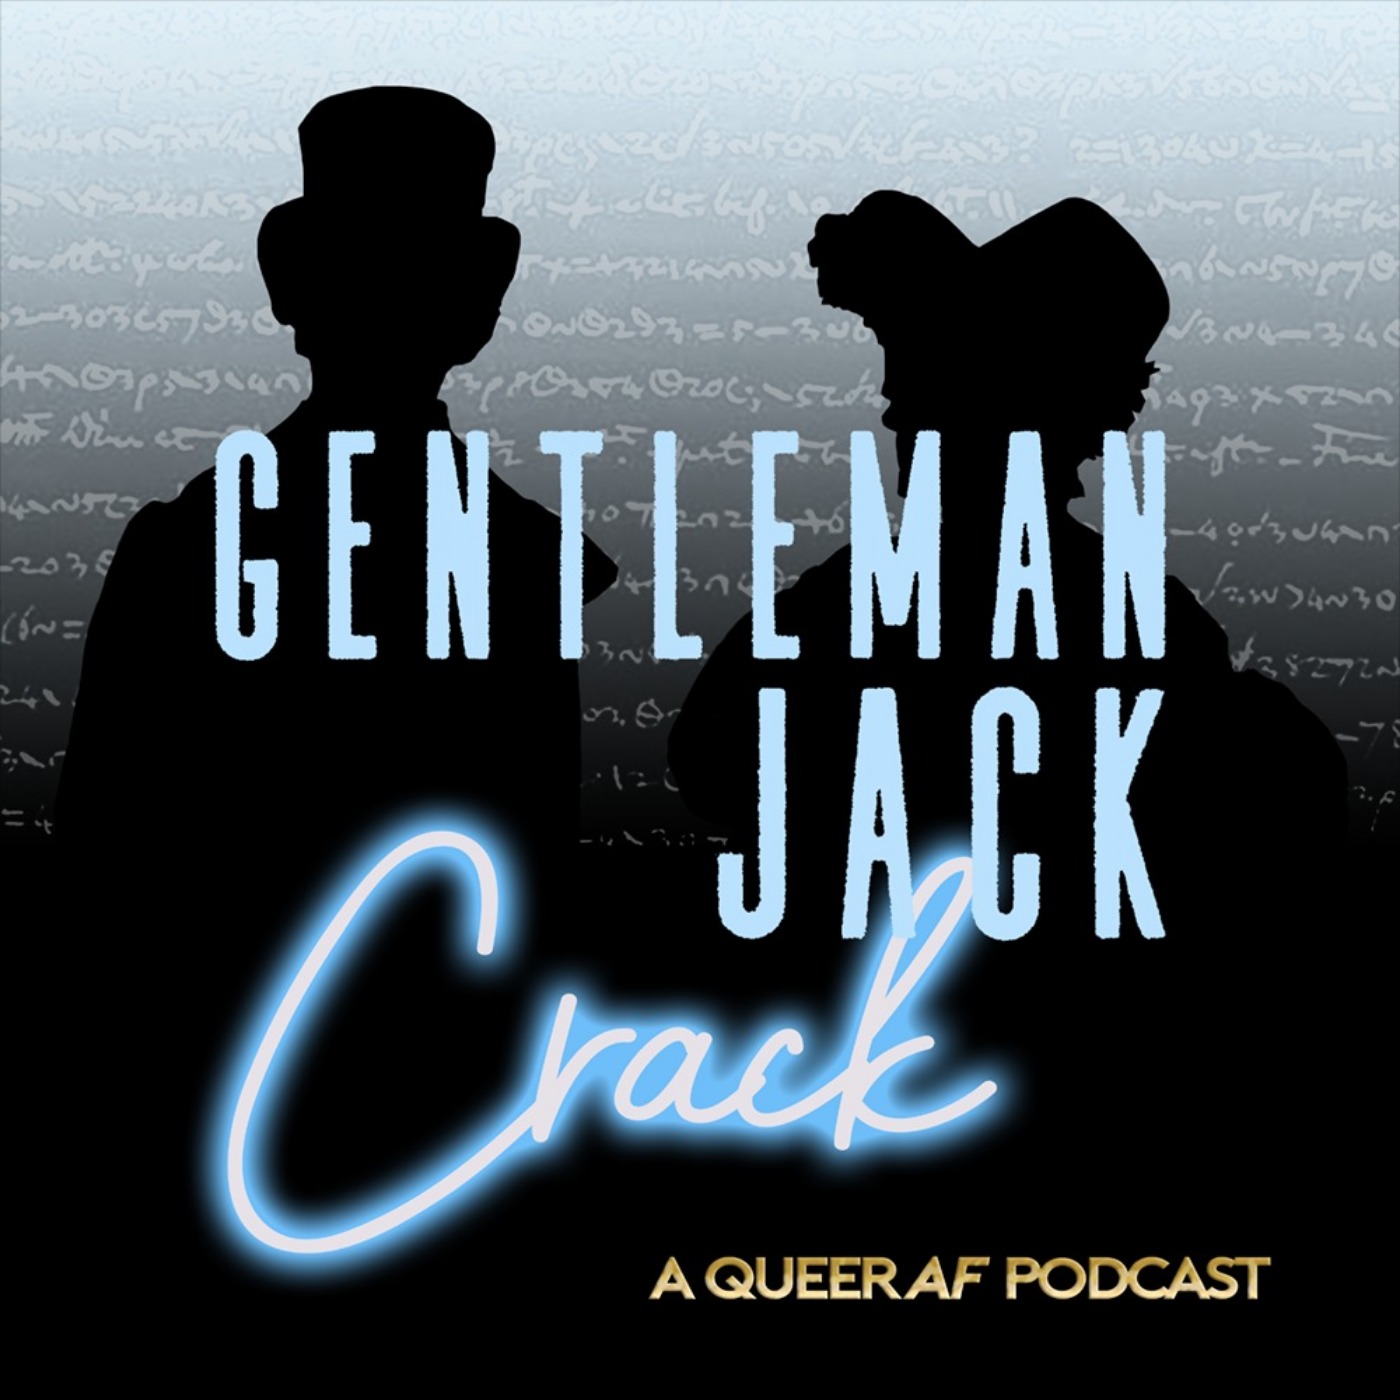 Gentleman Jack Crack - "Why've You Brought That?" Part I